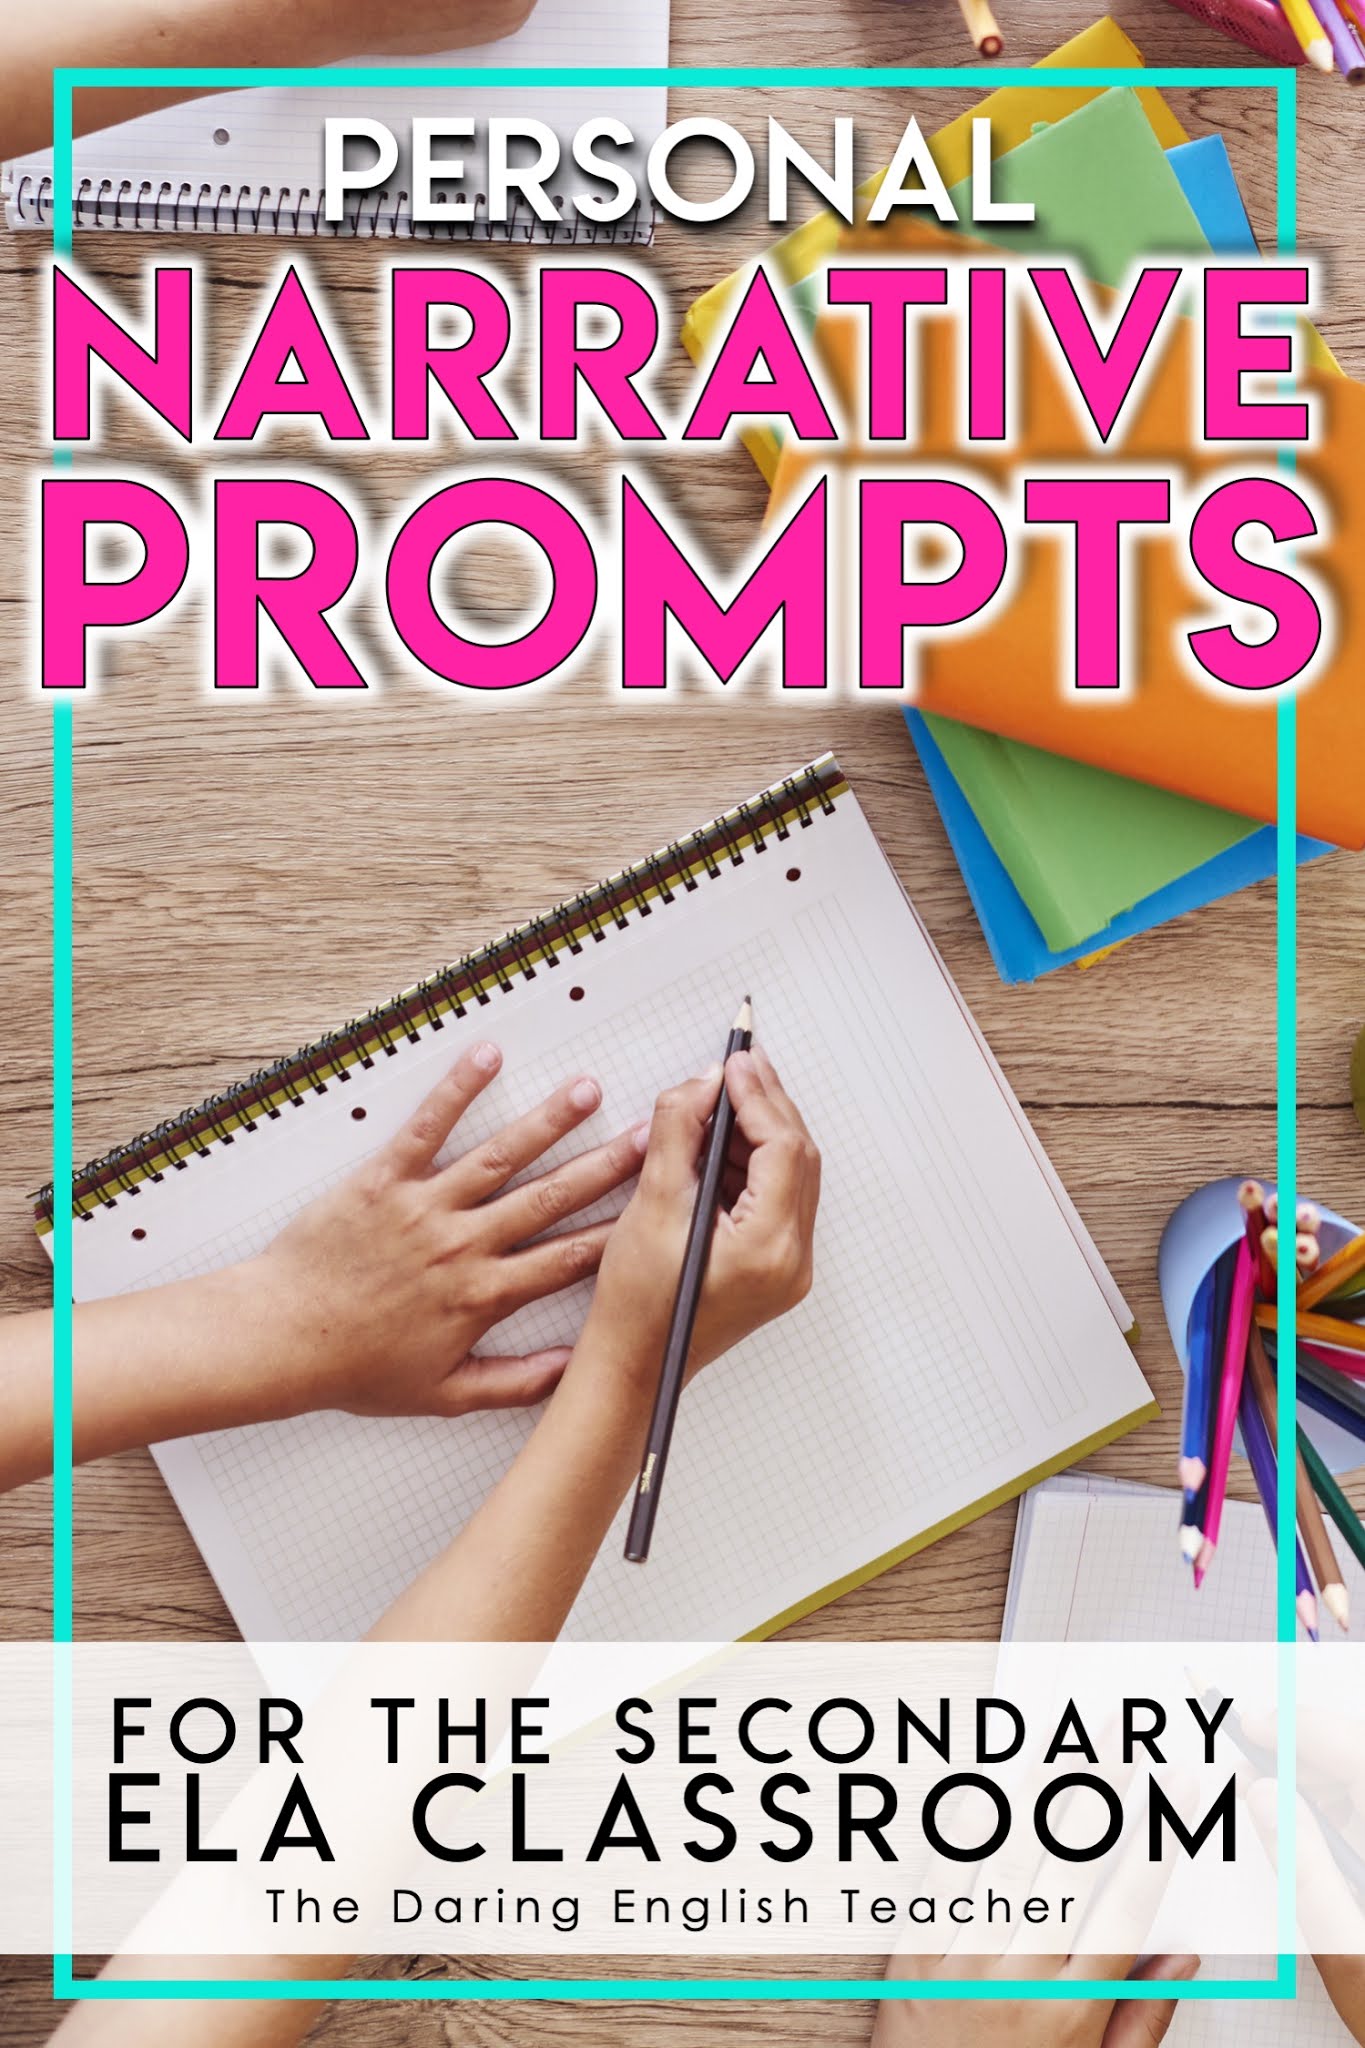 Personal Narrative Writing Prompts for the Secondary ELA Classroom